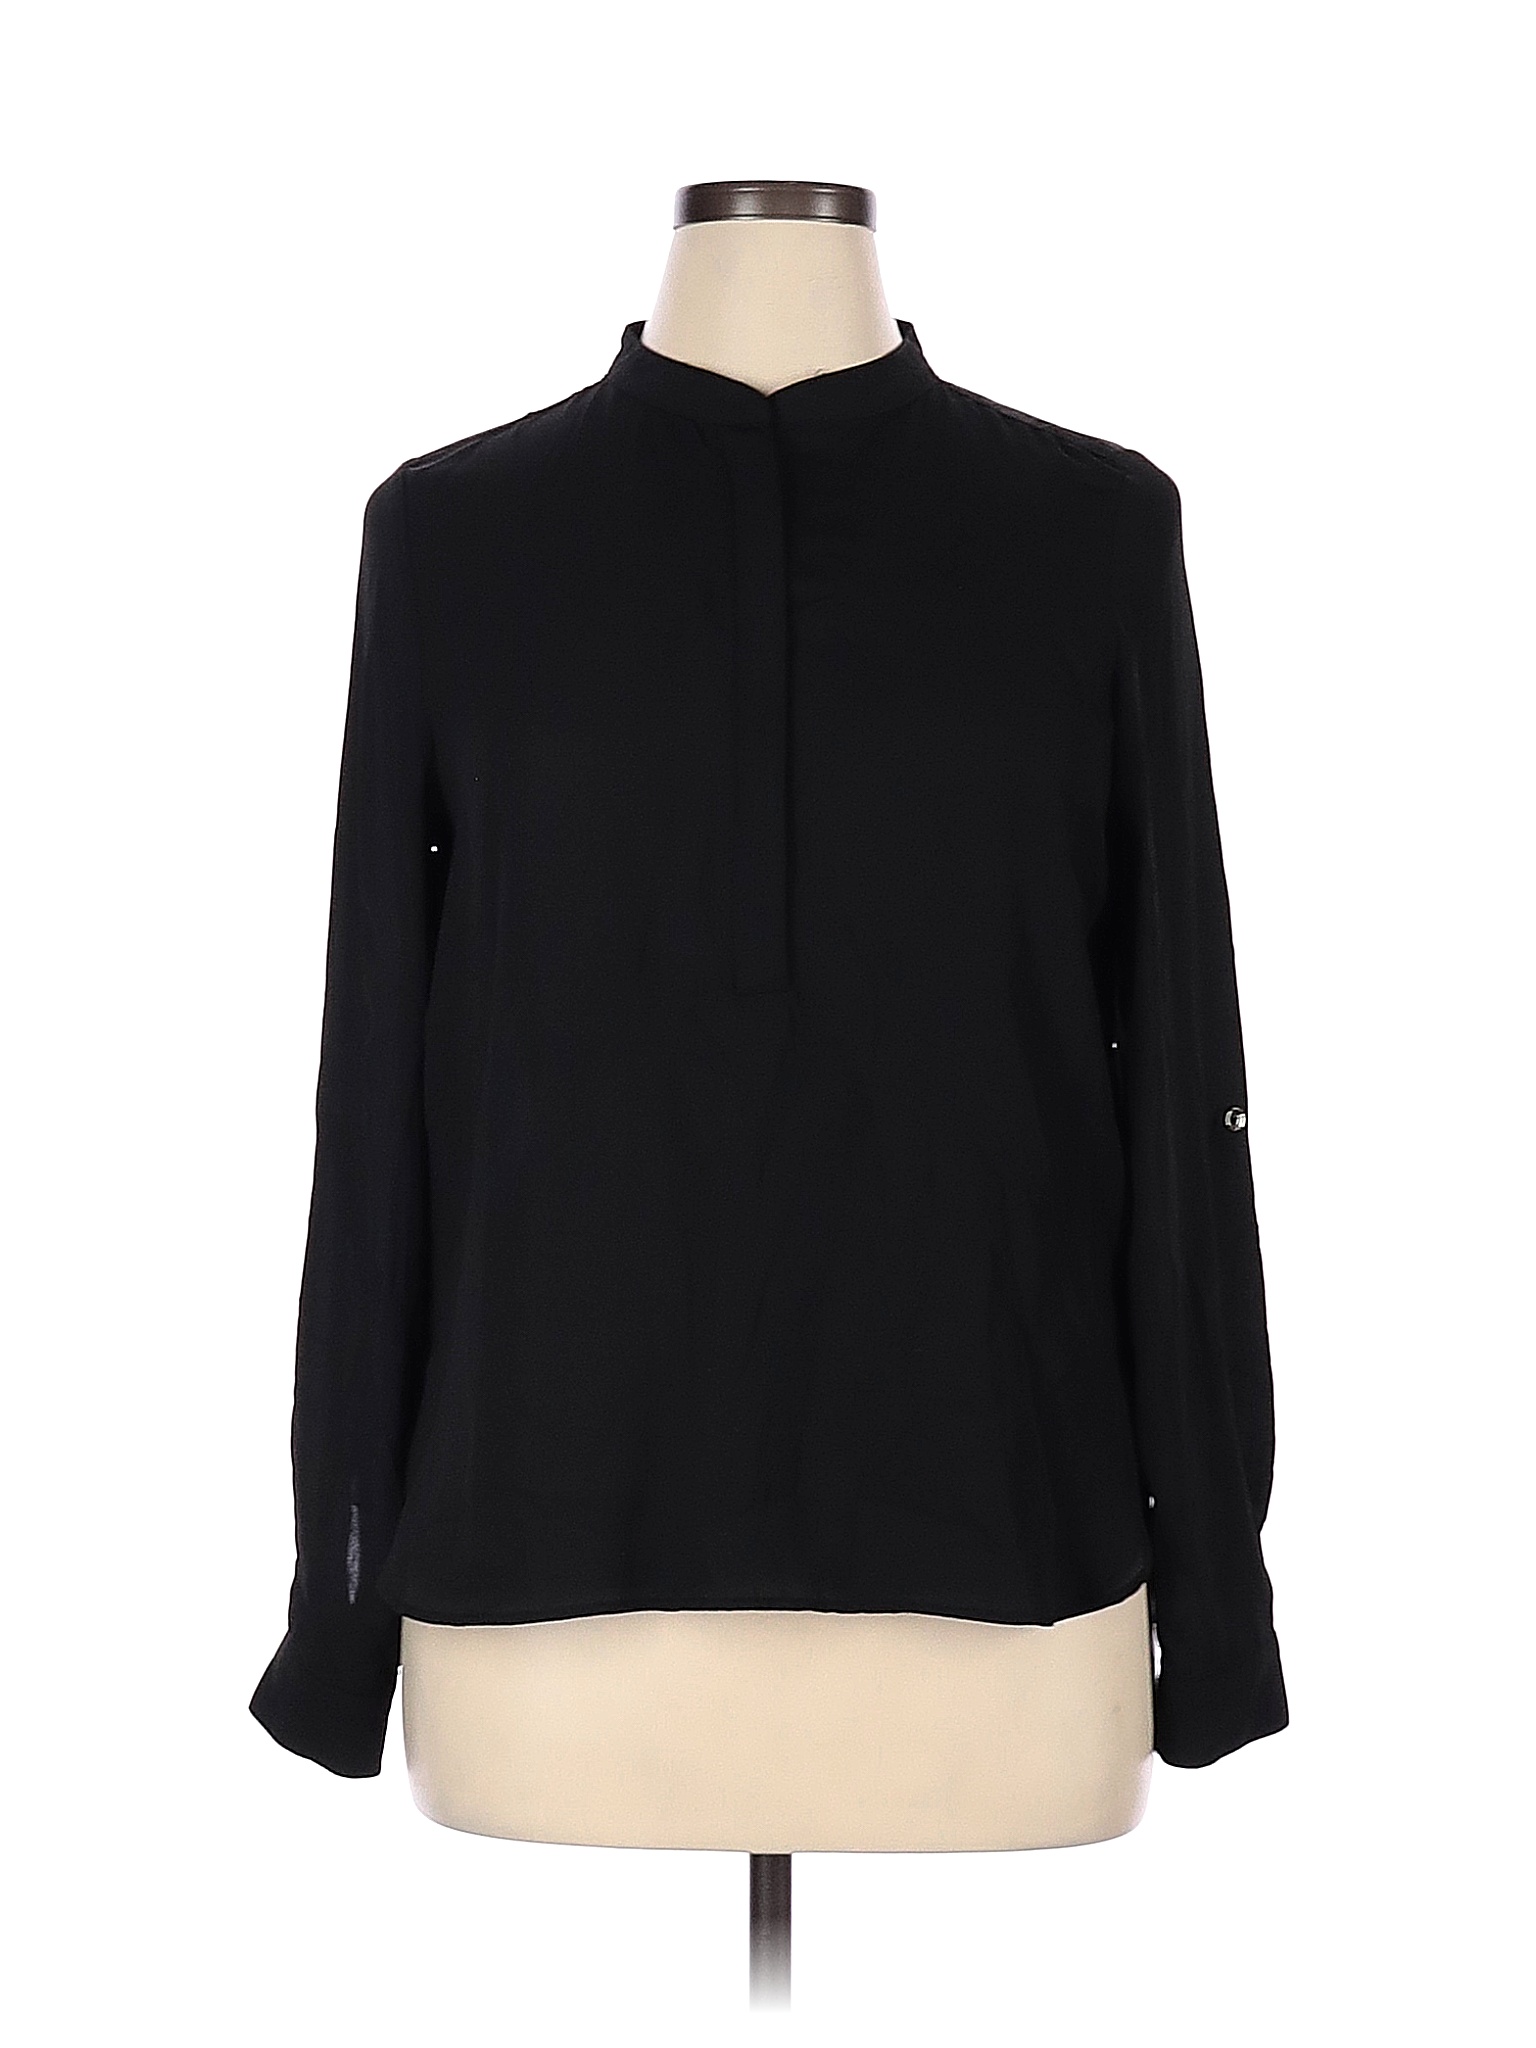 Shinestar 100% Polyester Solid Black Long Sleeve Blouse Size XL - 65% ...